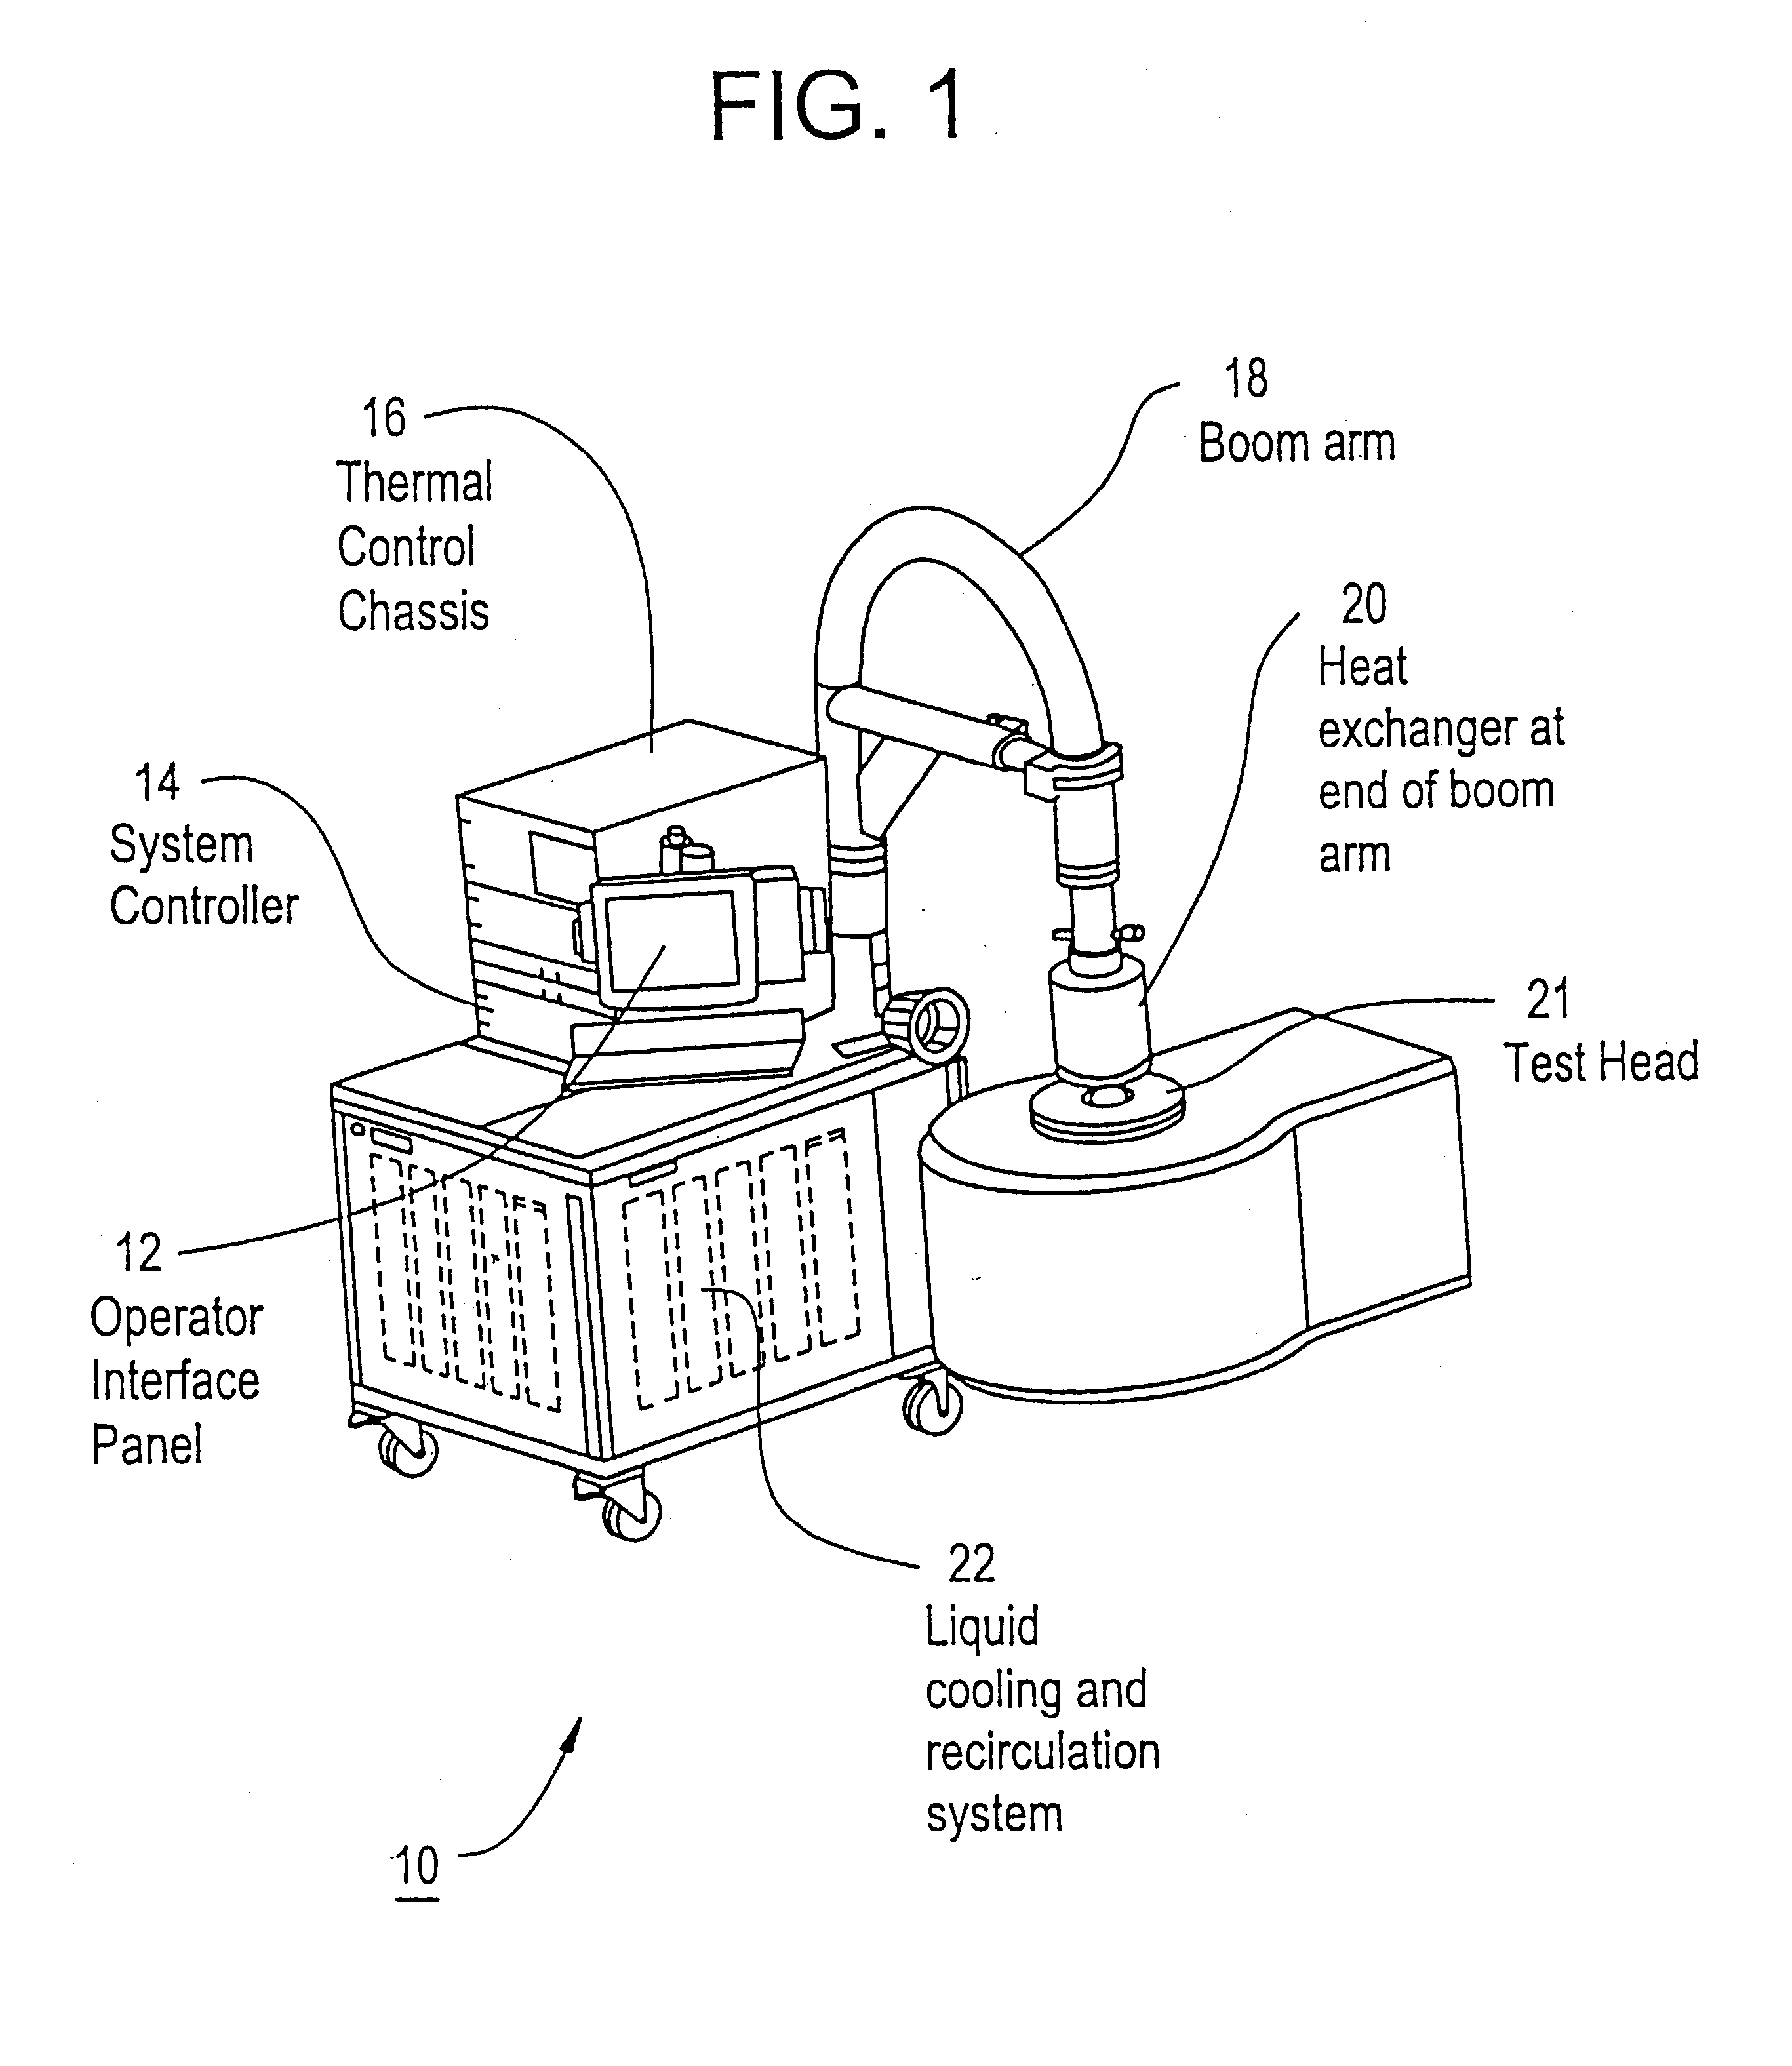 Apparatus, method and system of liquid-based, wide range, fast response temperature control of electric devices